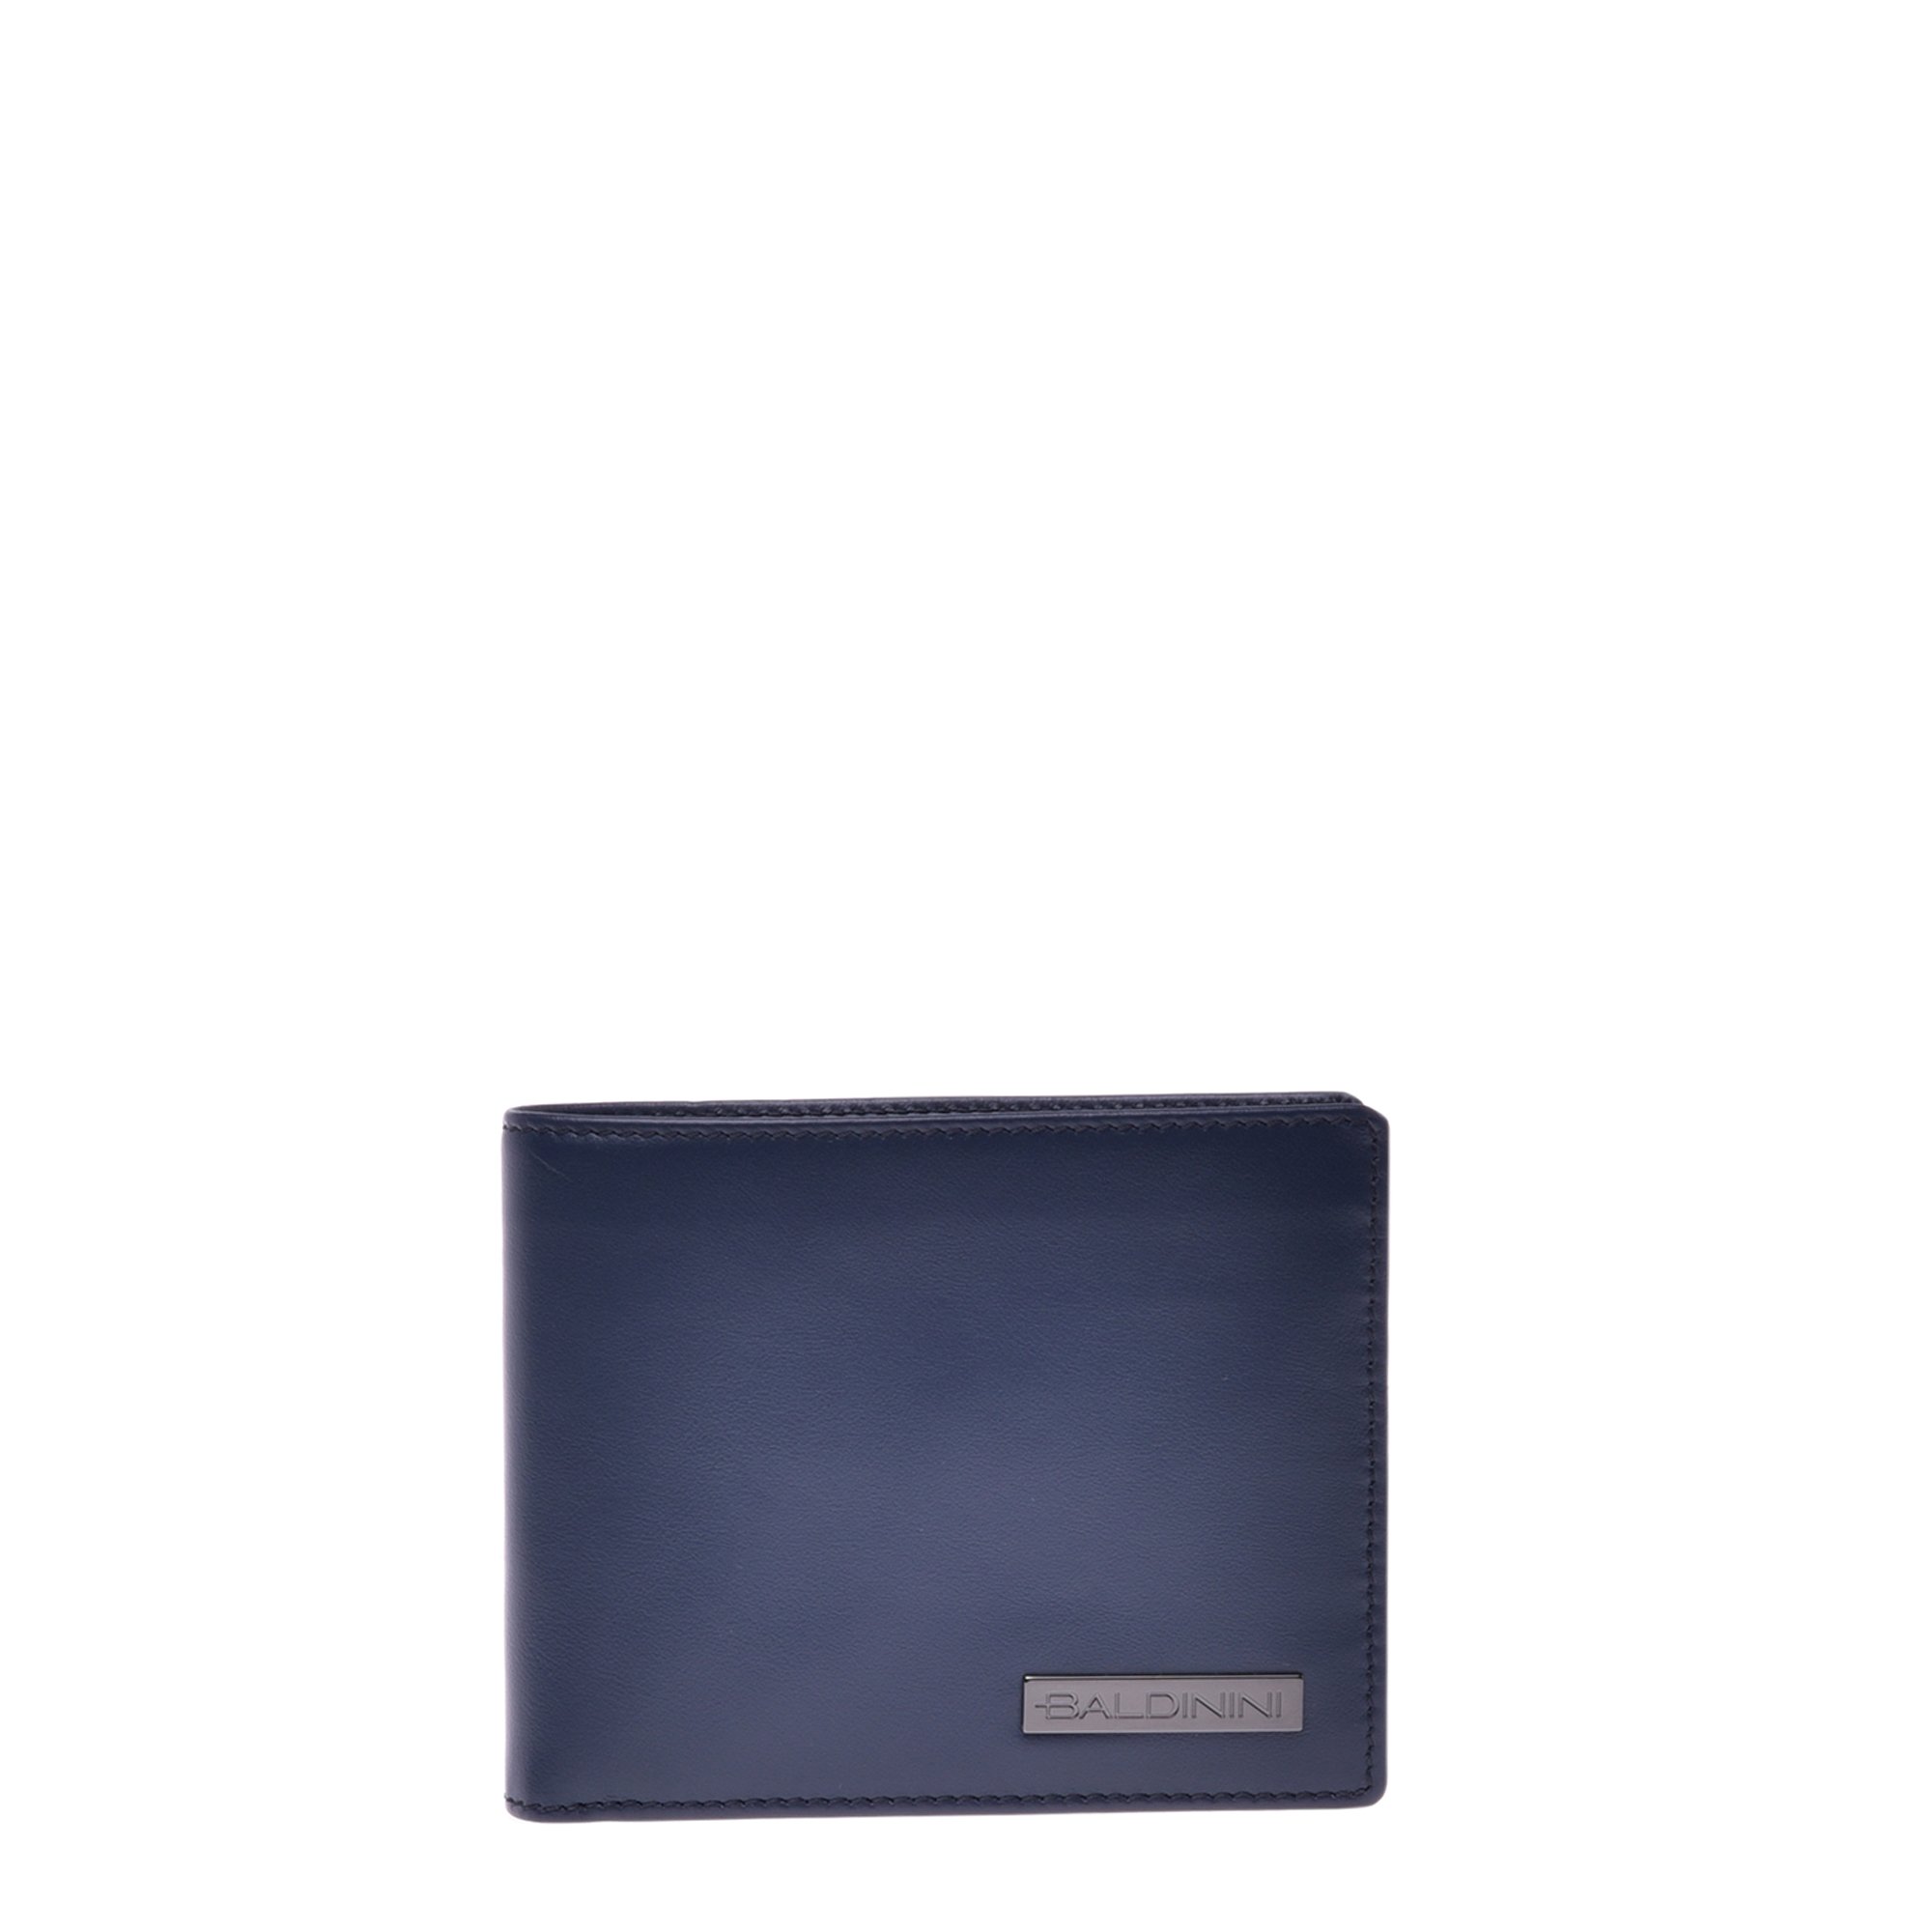 Navy blue leather wallet image